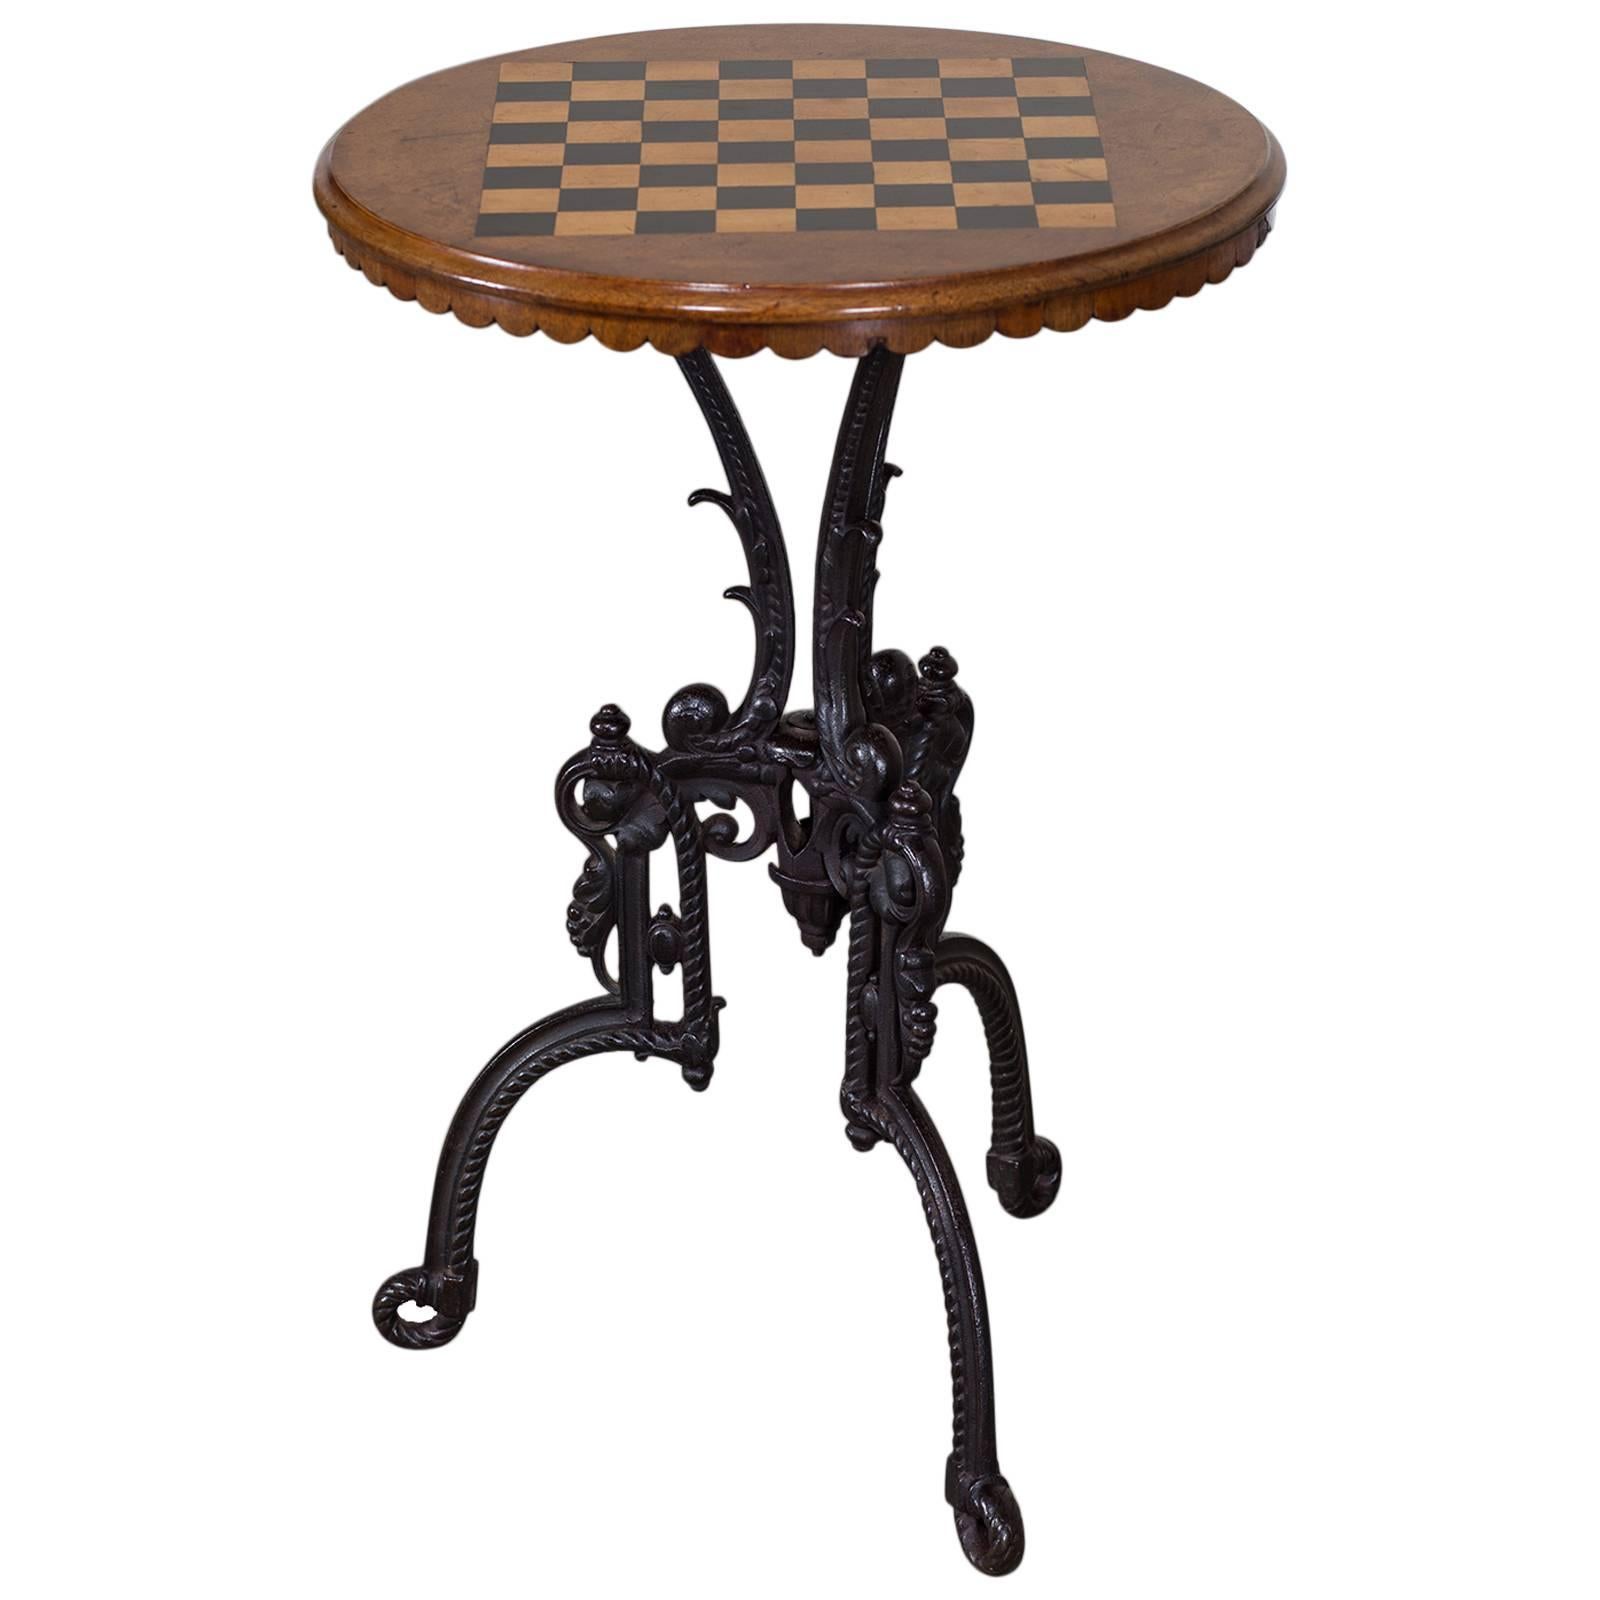 Antique French Chess Board Top Iron Table, circa 1880